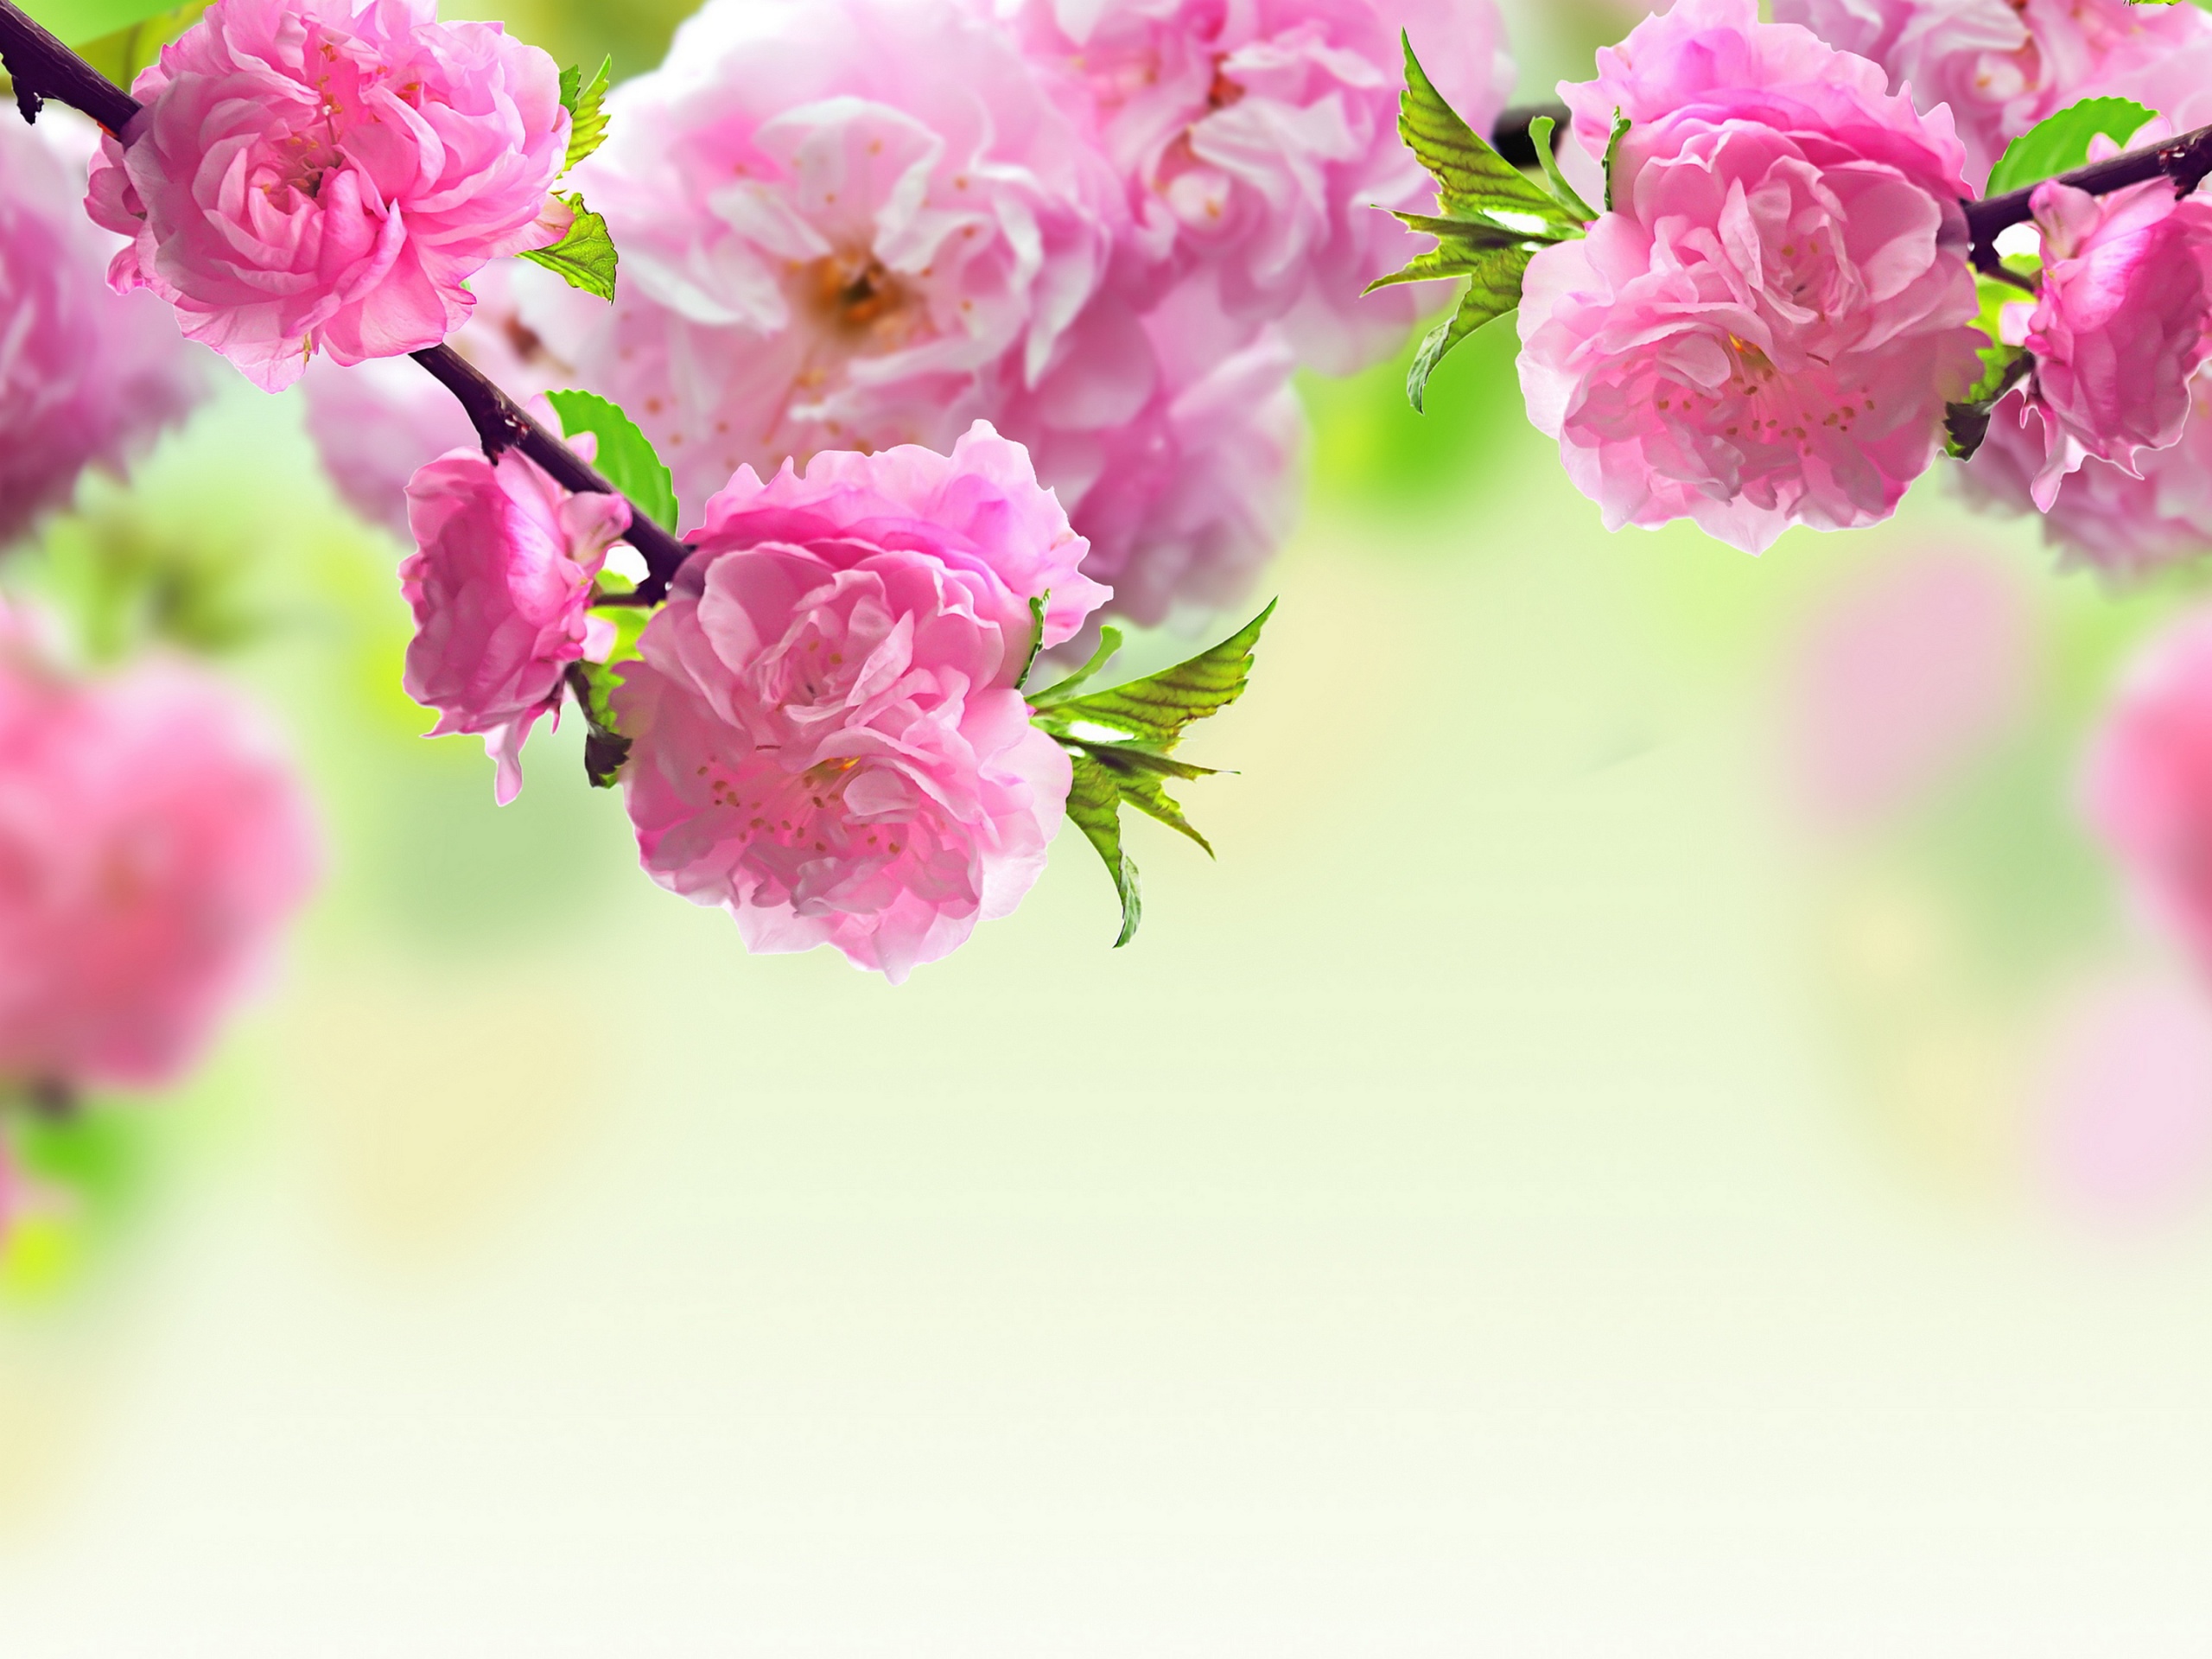 Mothers day backgrounds